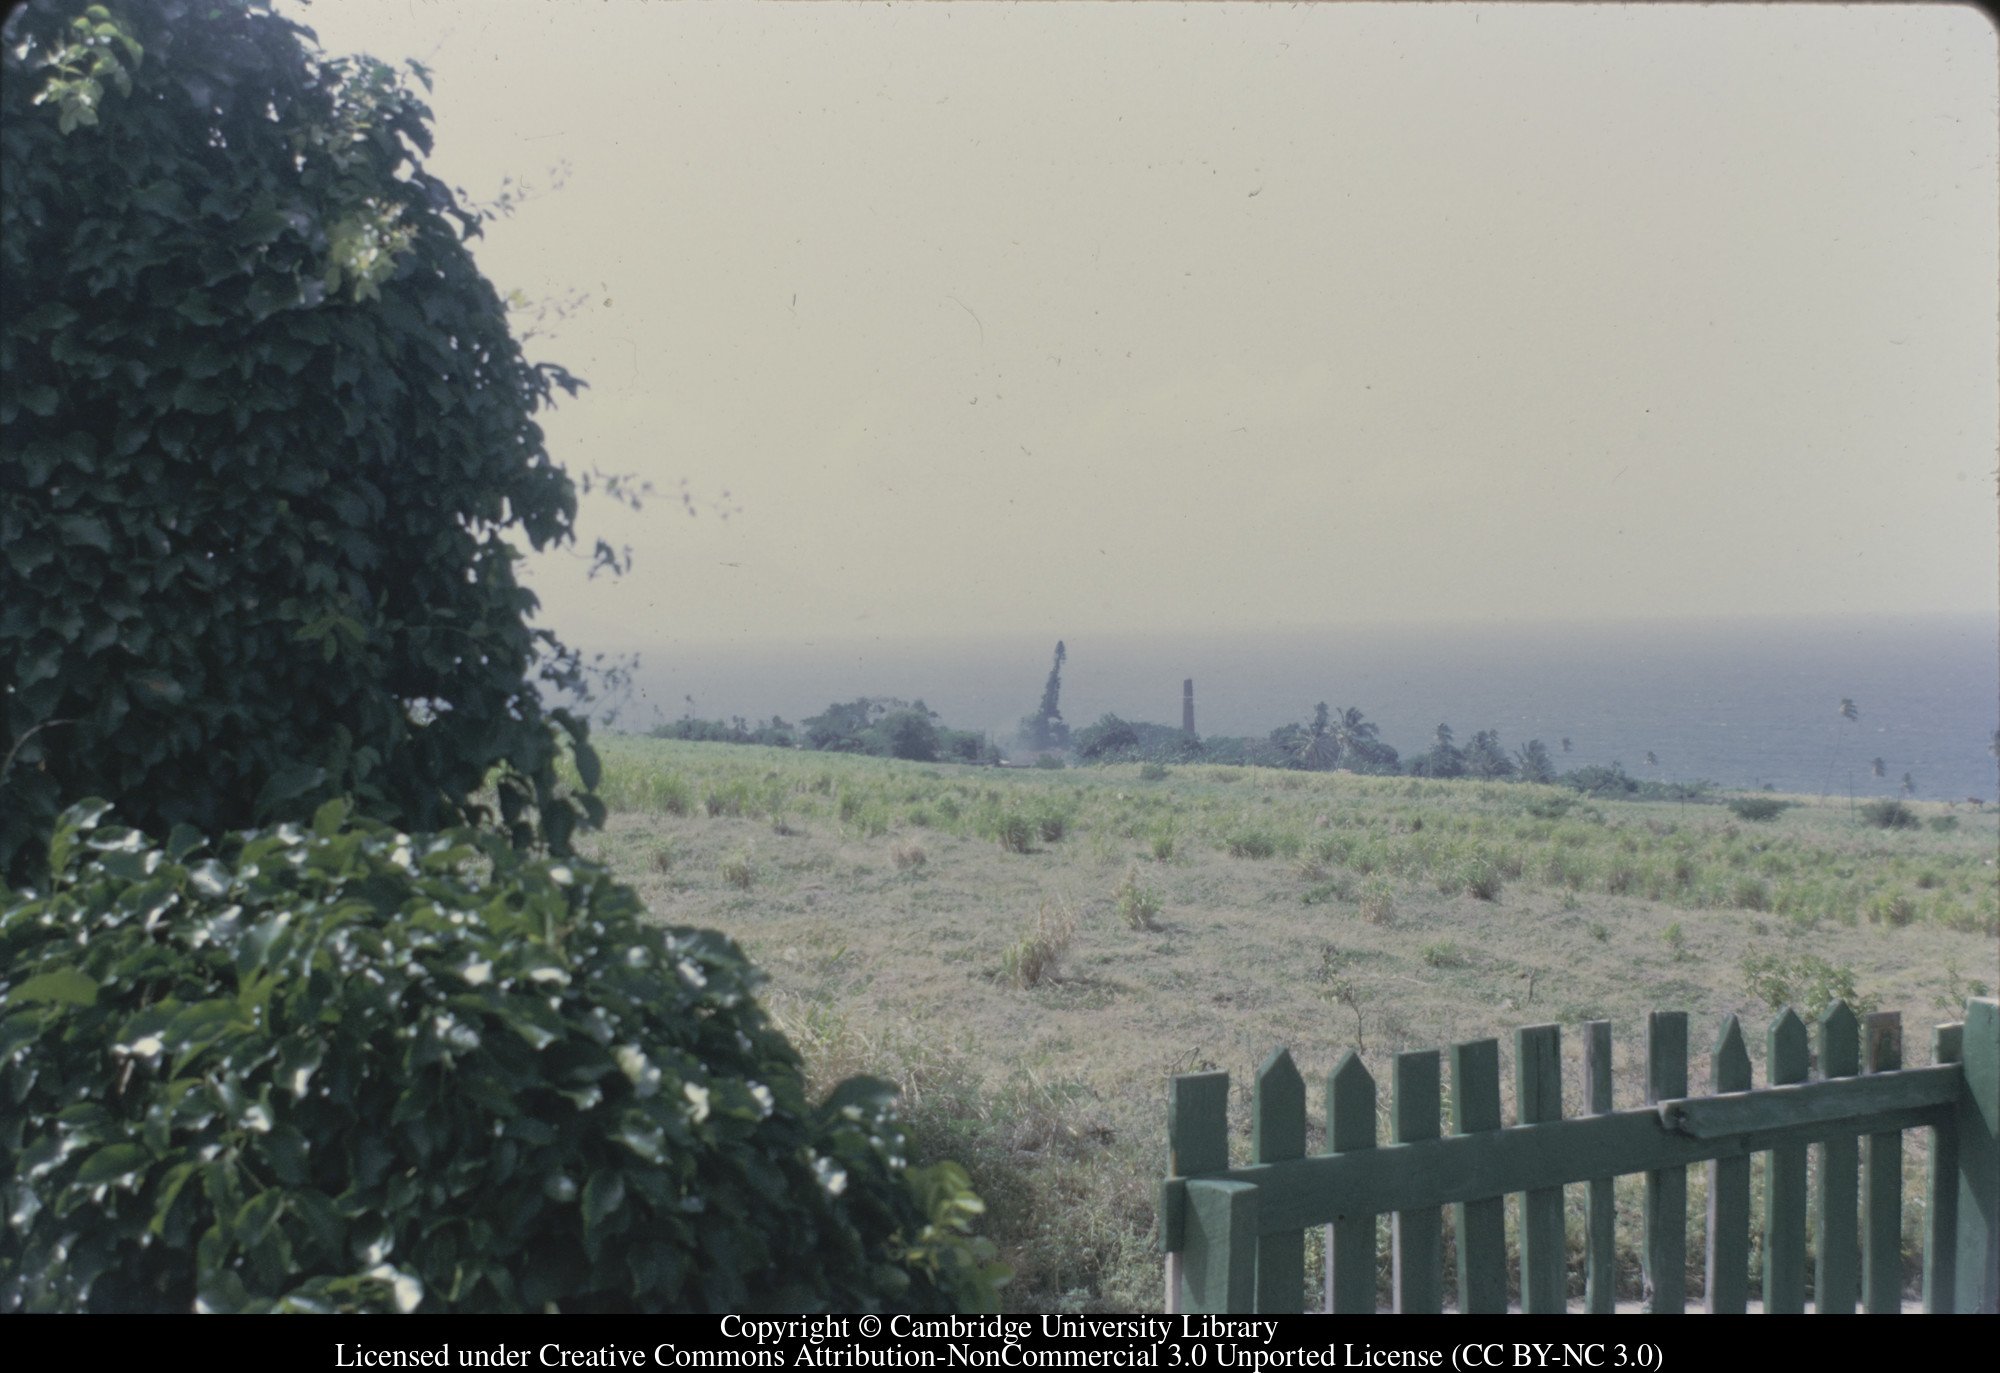 St Kitts : Fairview : old sugar mill in background, 1972